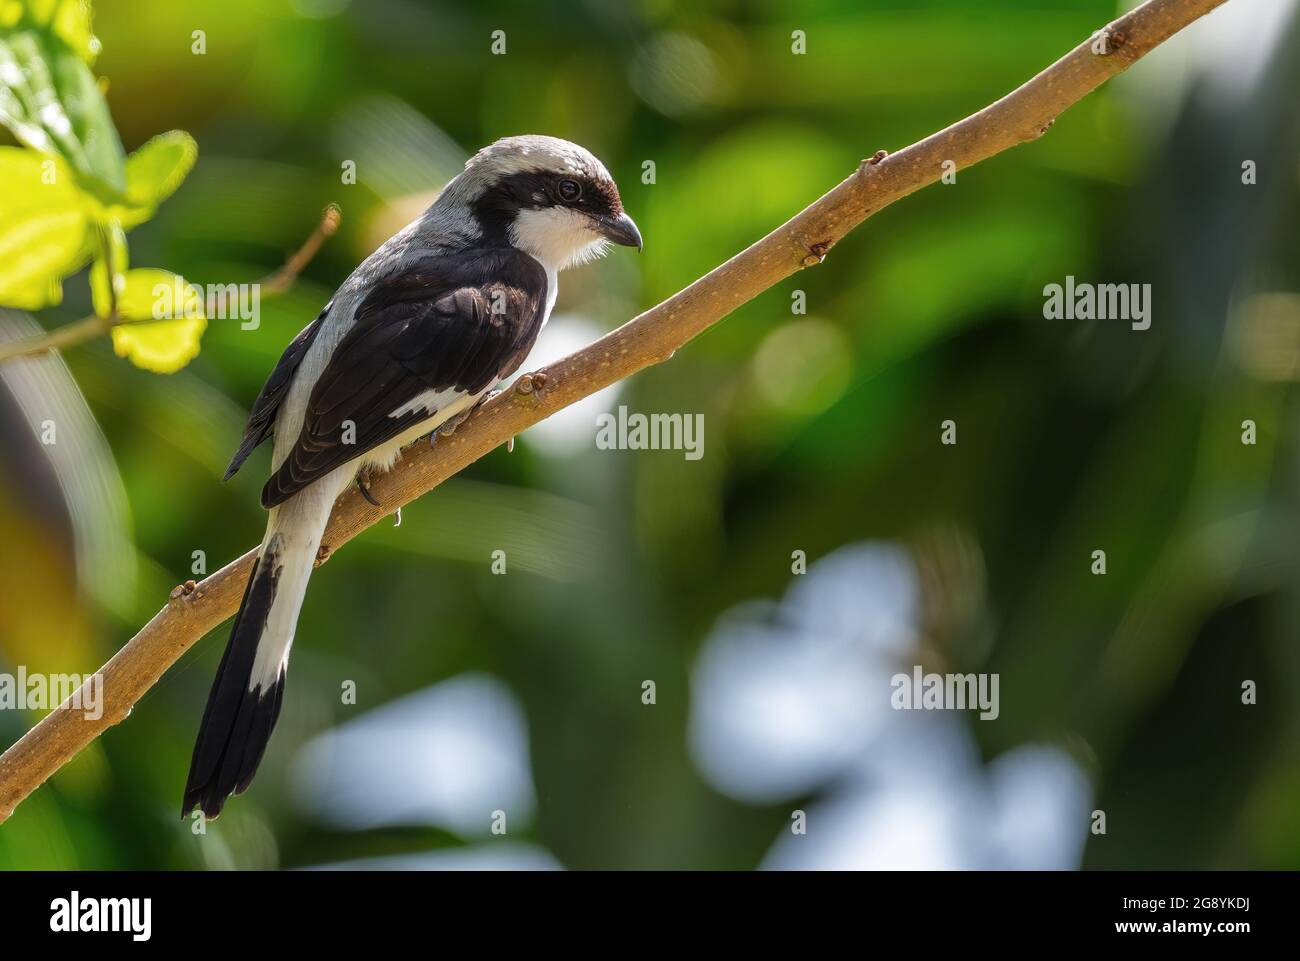 Grey-backed Fiscal - Lanius excubitoroides, beautiful large perching bird from African bushes and woodlands, lake Ziway, Ethiopia. Stock Photo